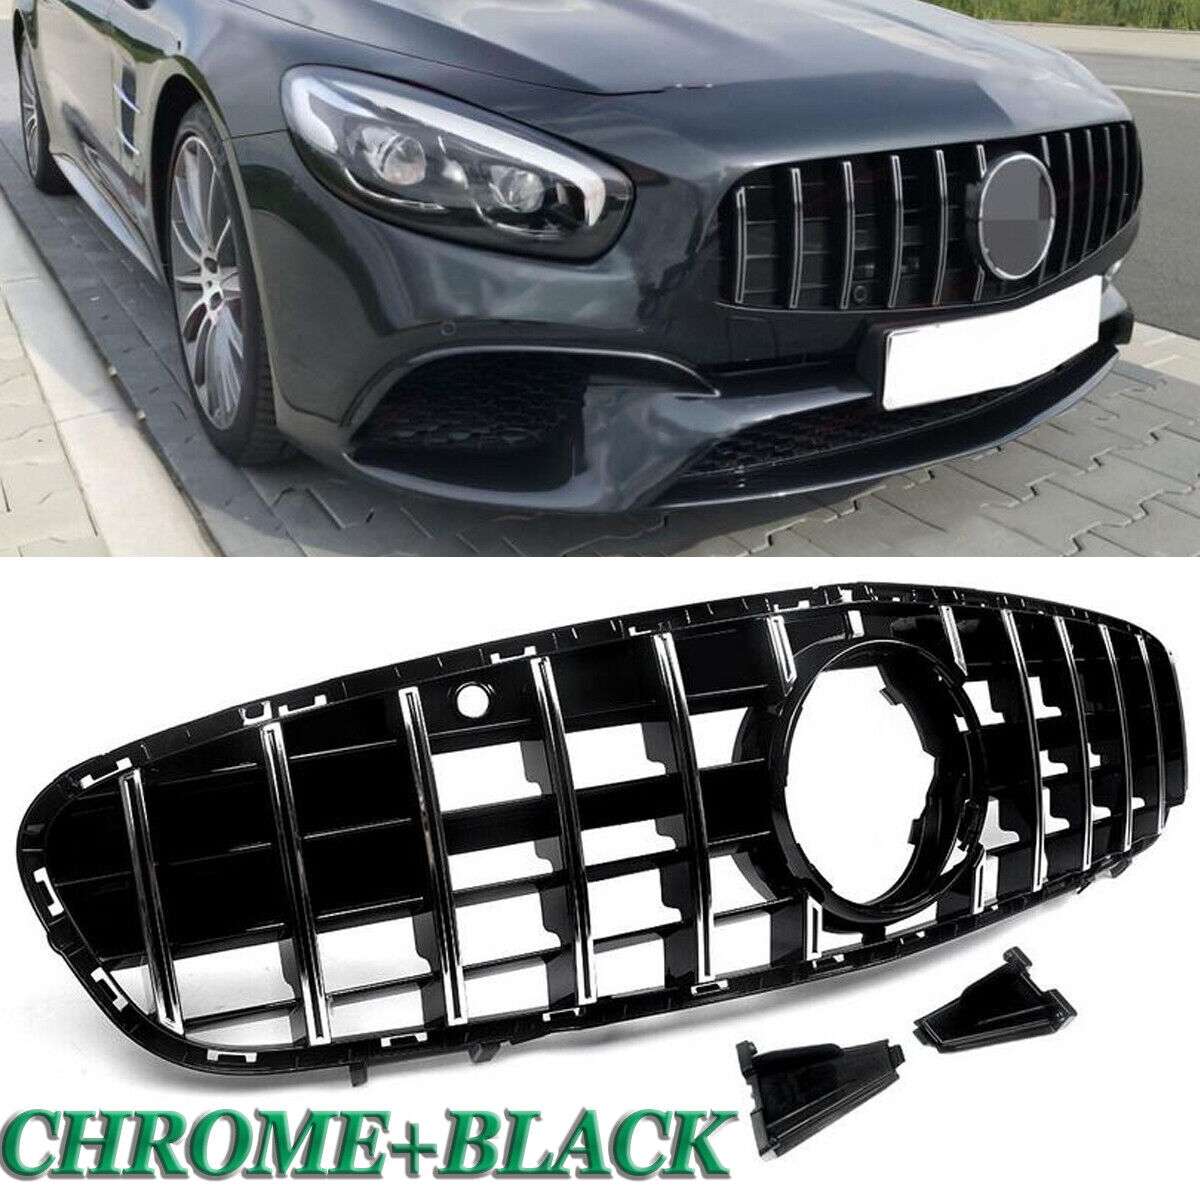 Chorme + Black Front Grille For Mercedes Benz R231 GT GTR Style Grill 2017-2020